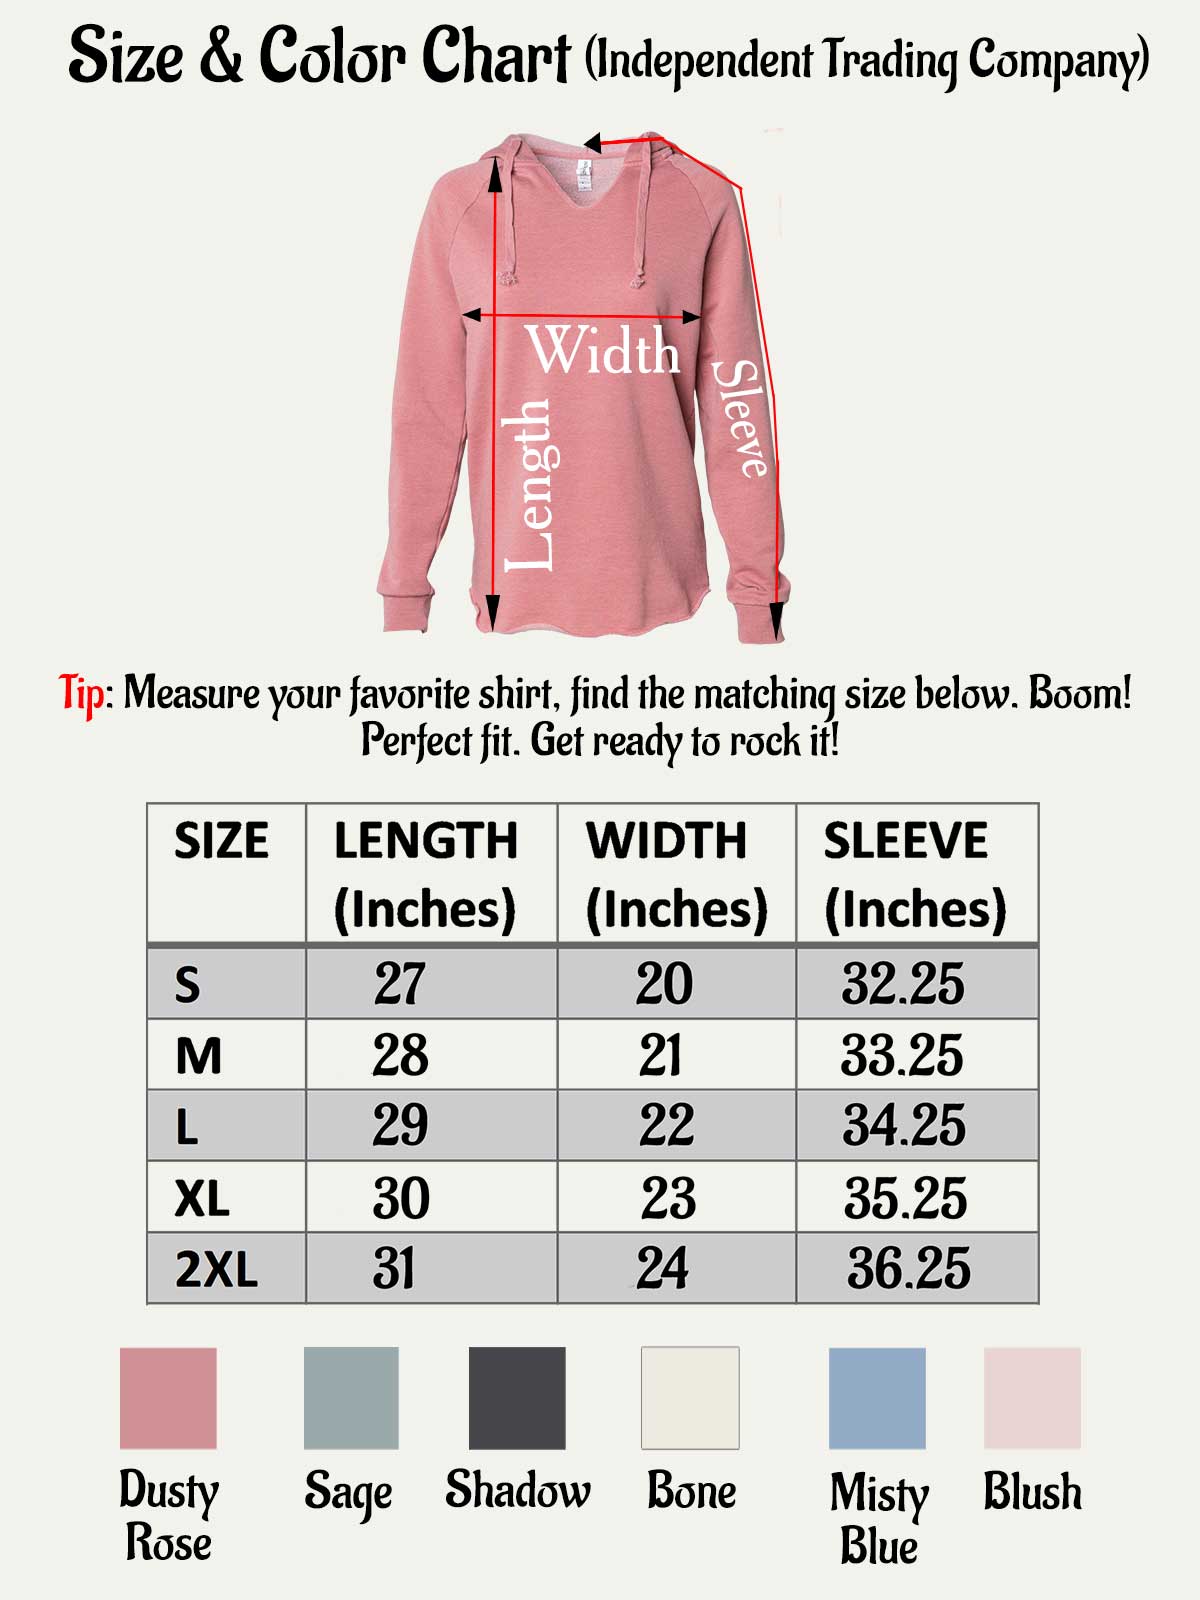 the size and color chart for a sweatshirt